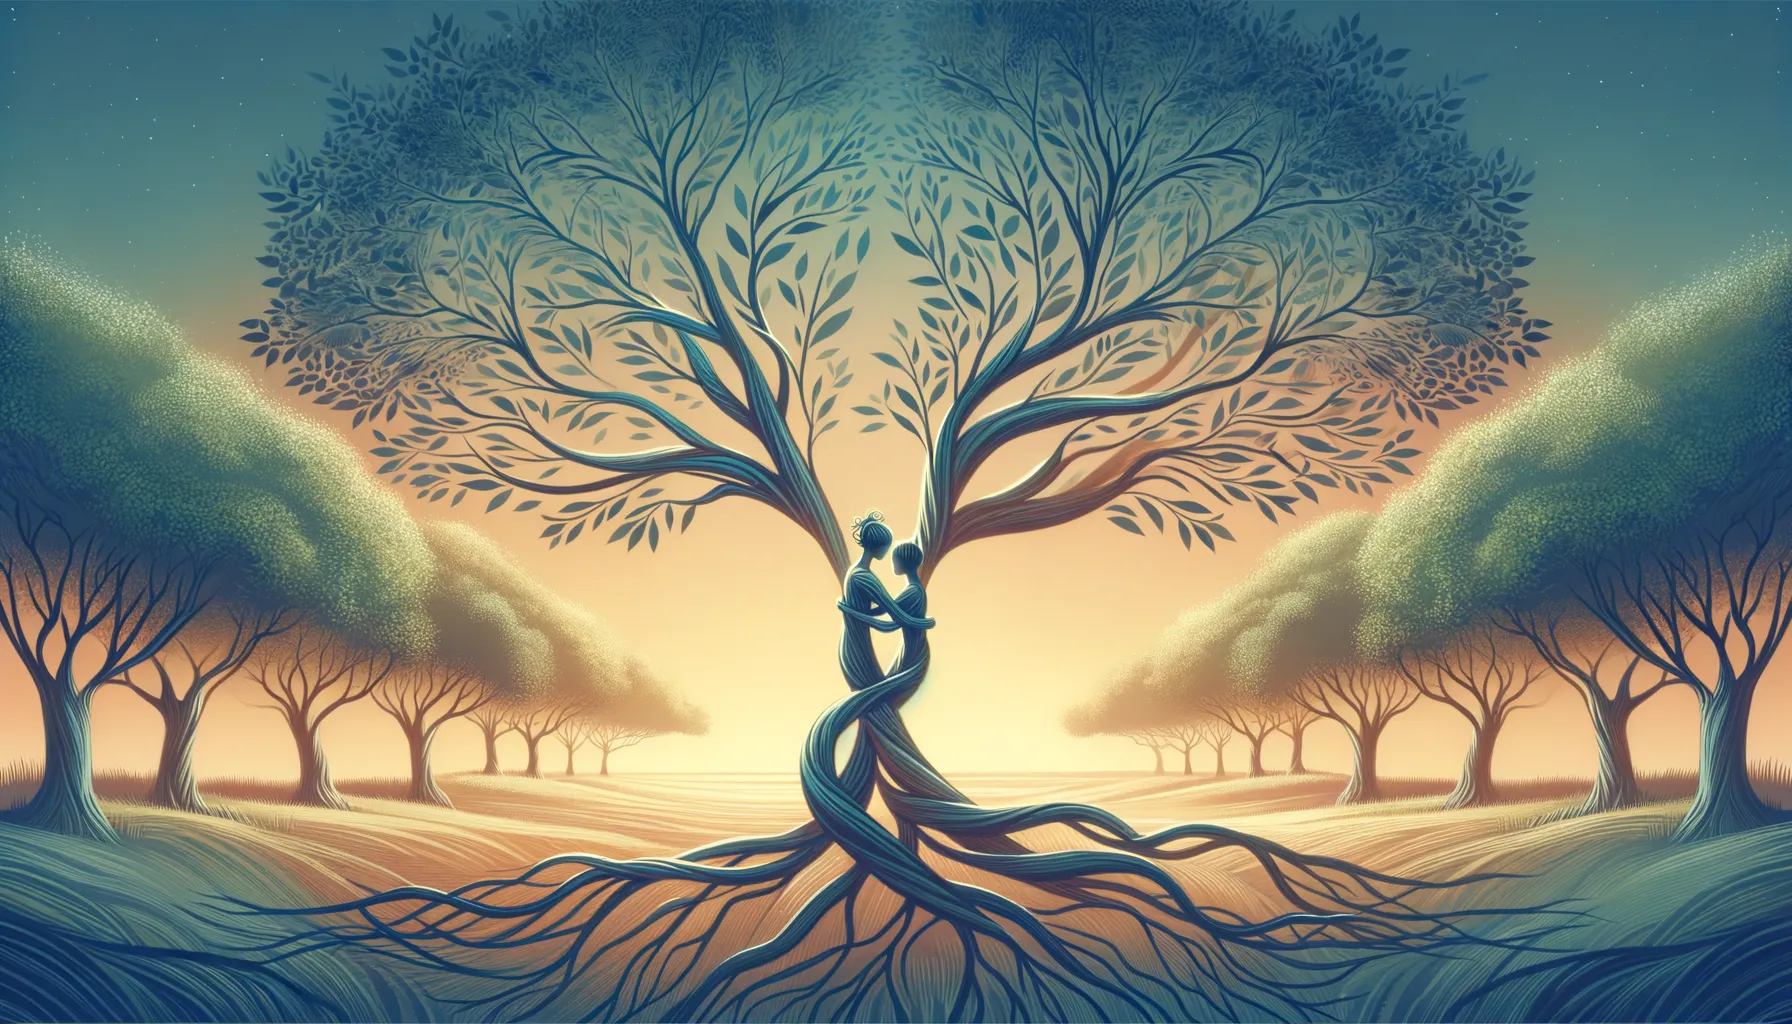 In this serene image, the entwined branches represent the intricate dance of balanced communication, where every word and silence is woven into the tapestry of a harmonious relationship.